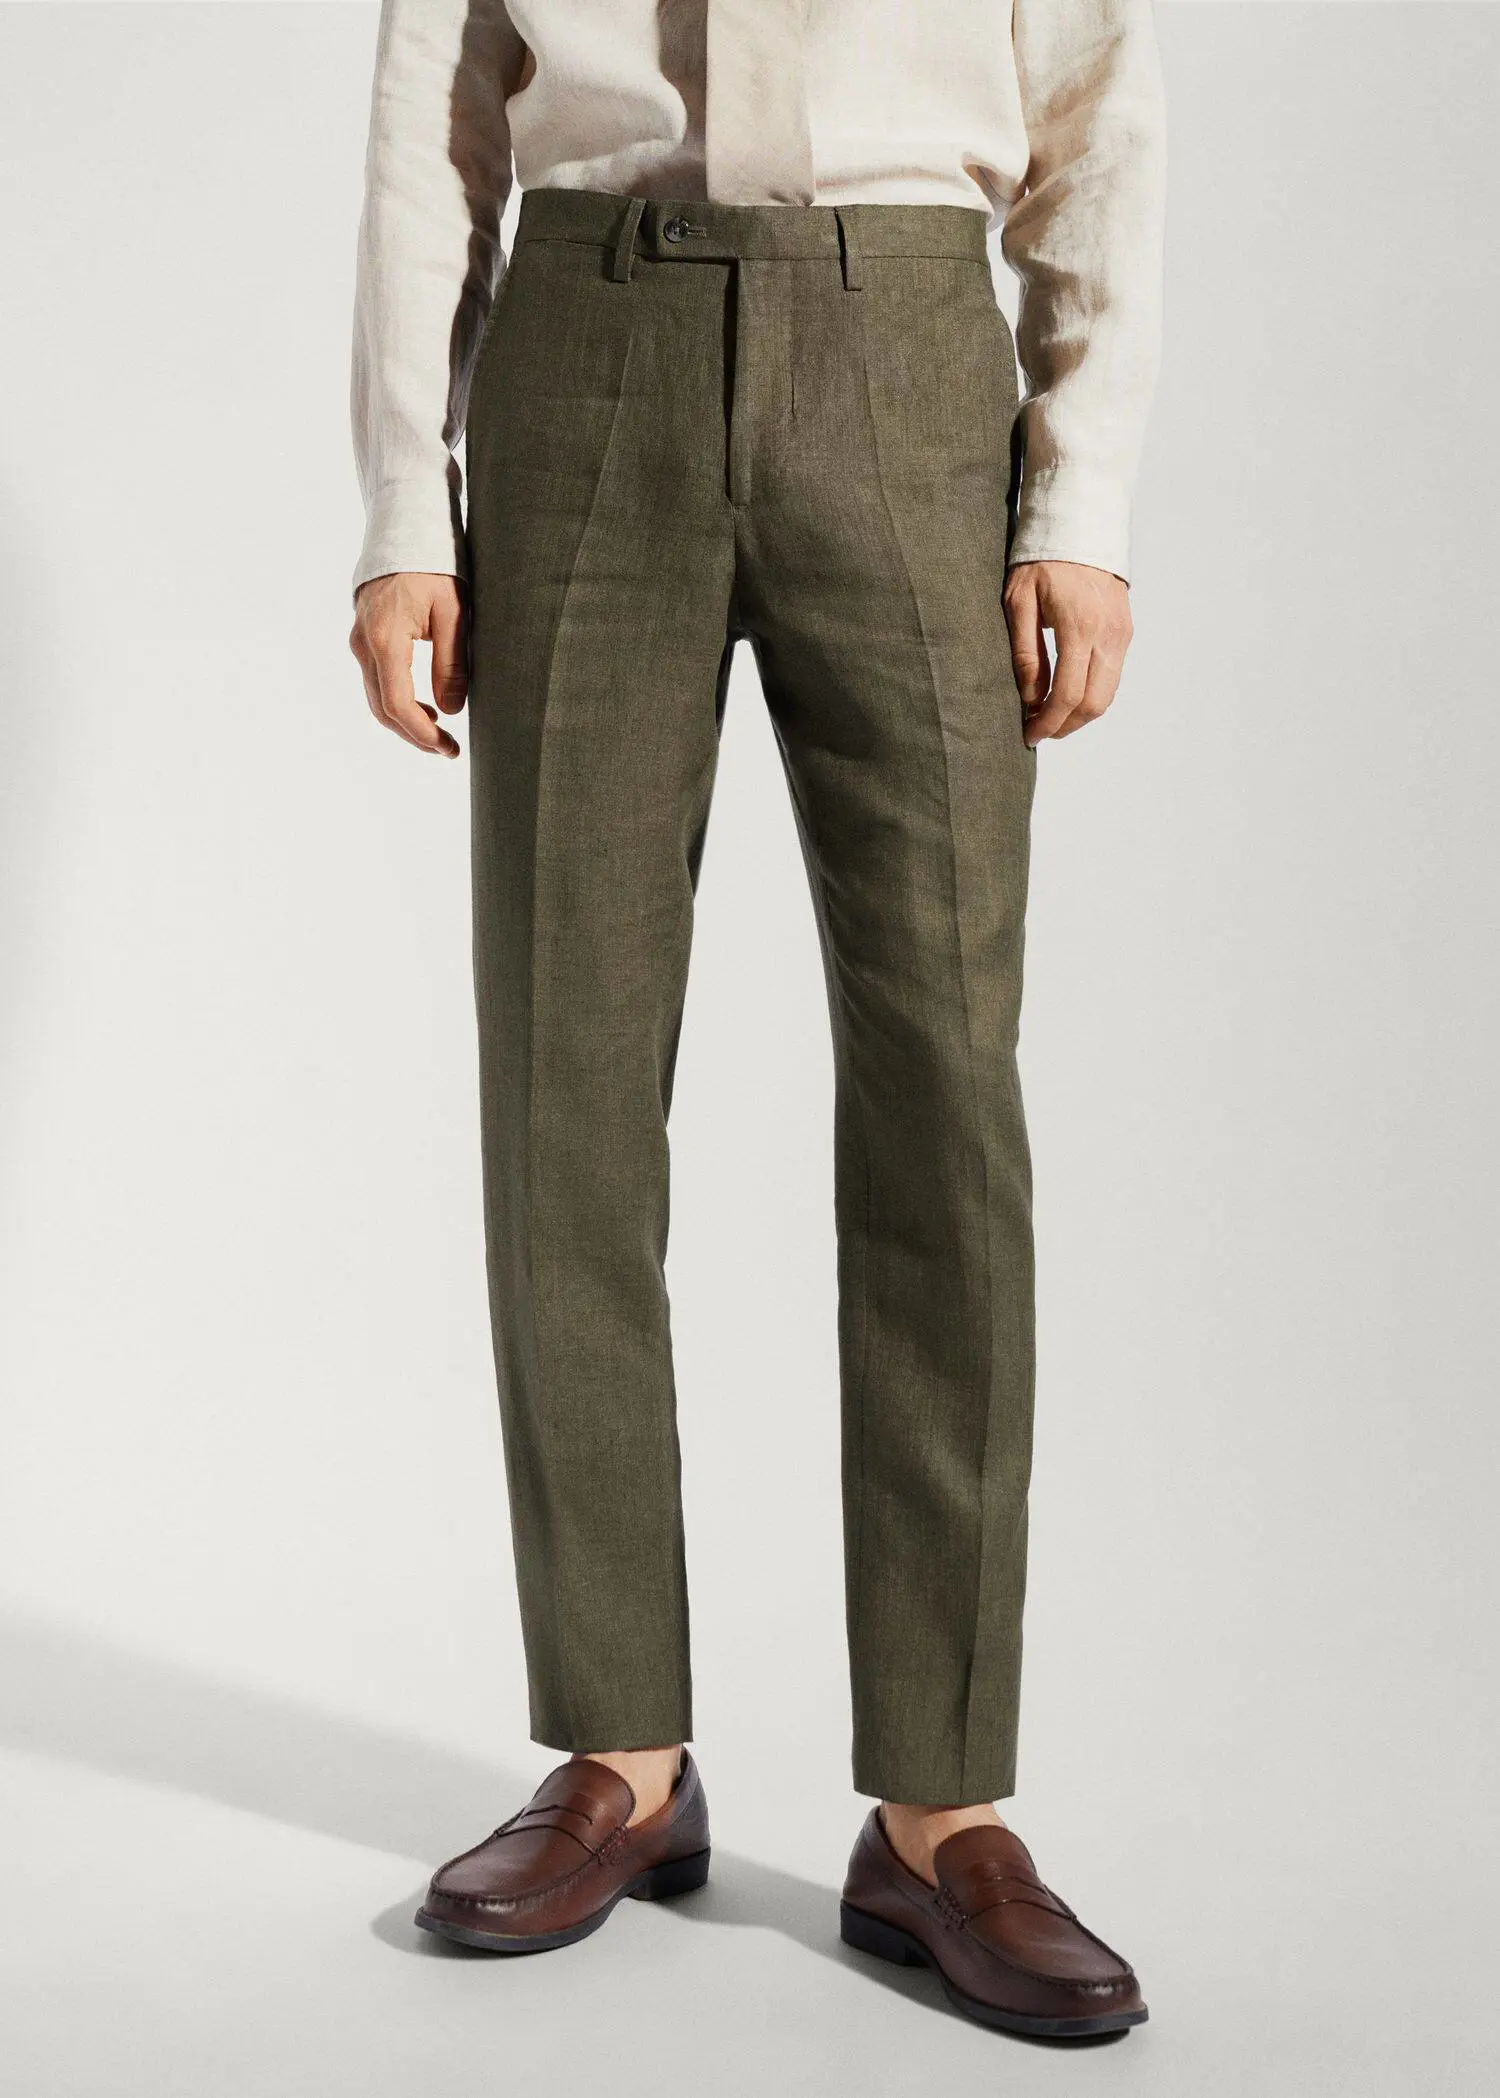 Mango 100% linen suit trousers. a person wearing a pair of green pants. 